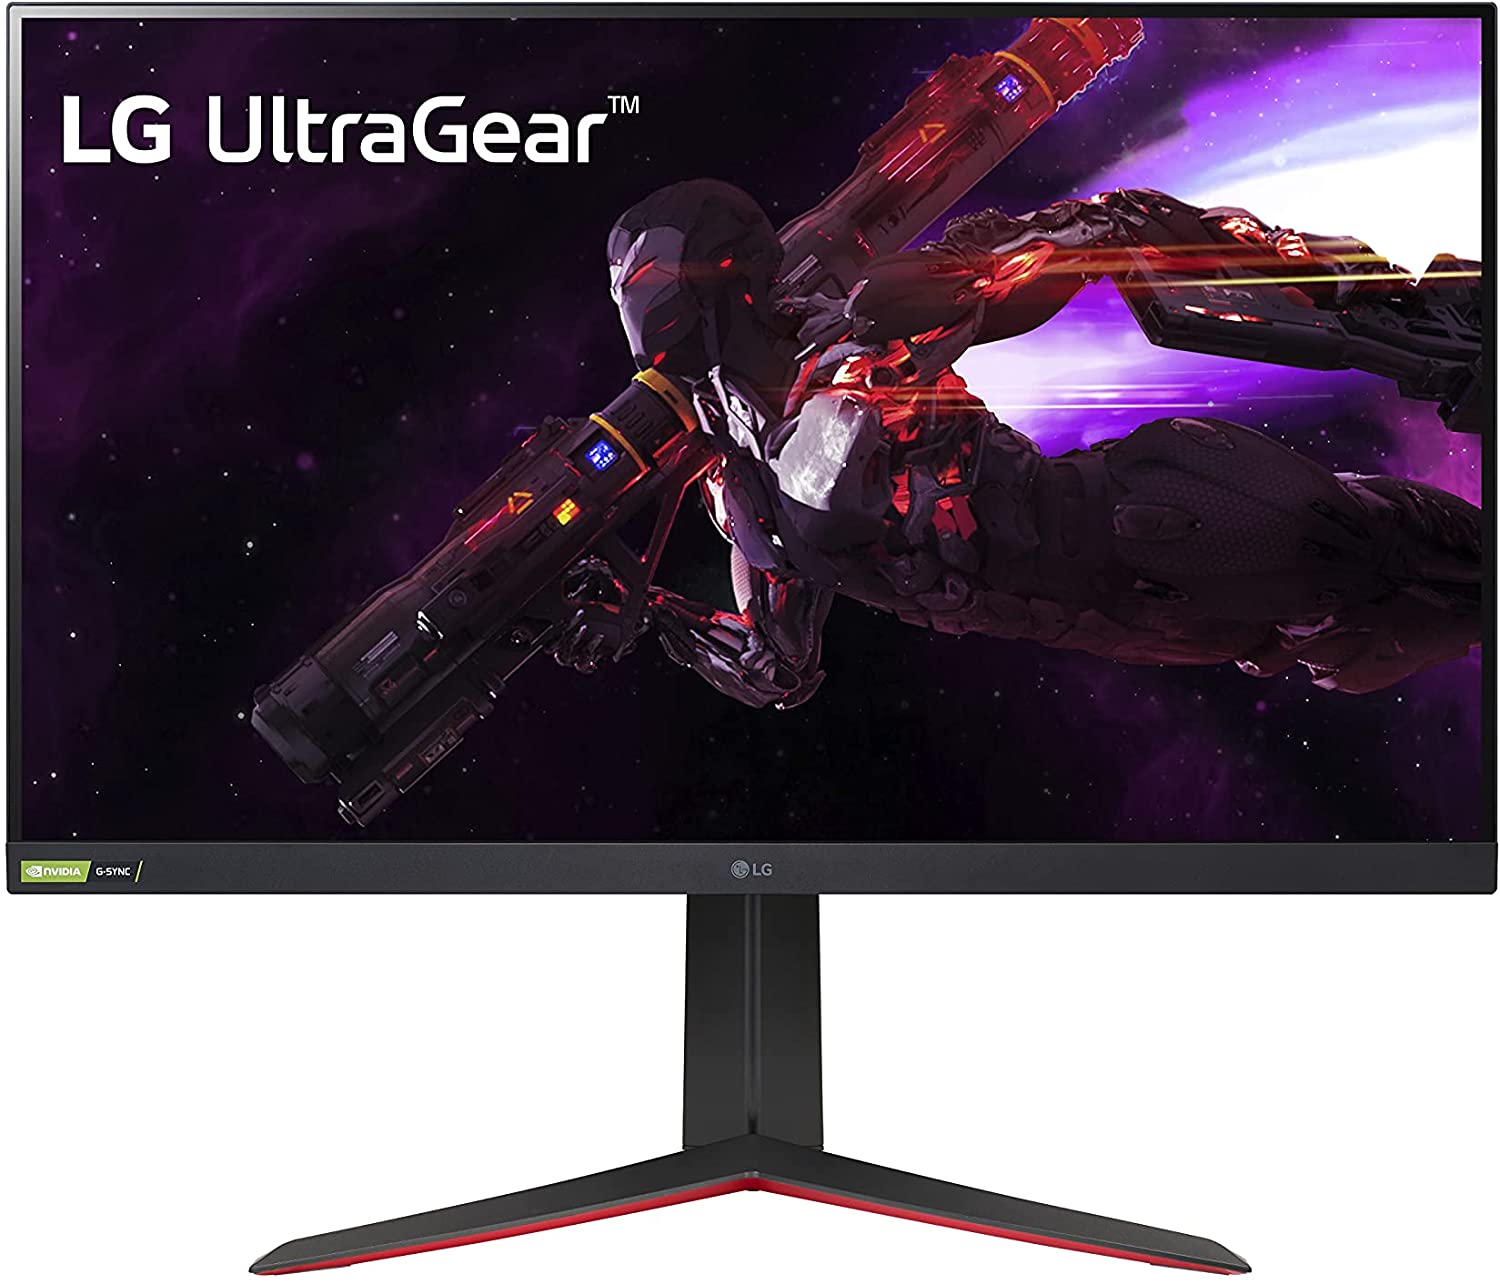 LG 32GP850-B 32” Ultragear QHD (2560 x 1440) Nano IPS Gaming Monitor w: 1ms (GtG) Response Time & 165Hz Refresh Rate, NVIDIA G-SYNC Compatible with AMD